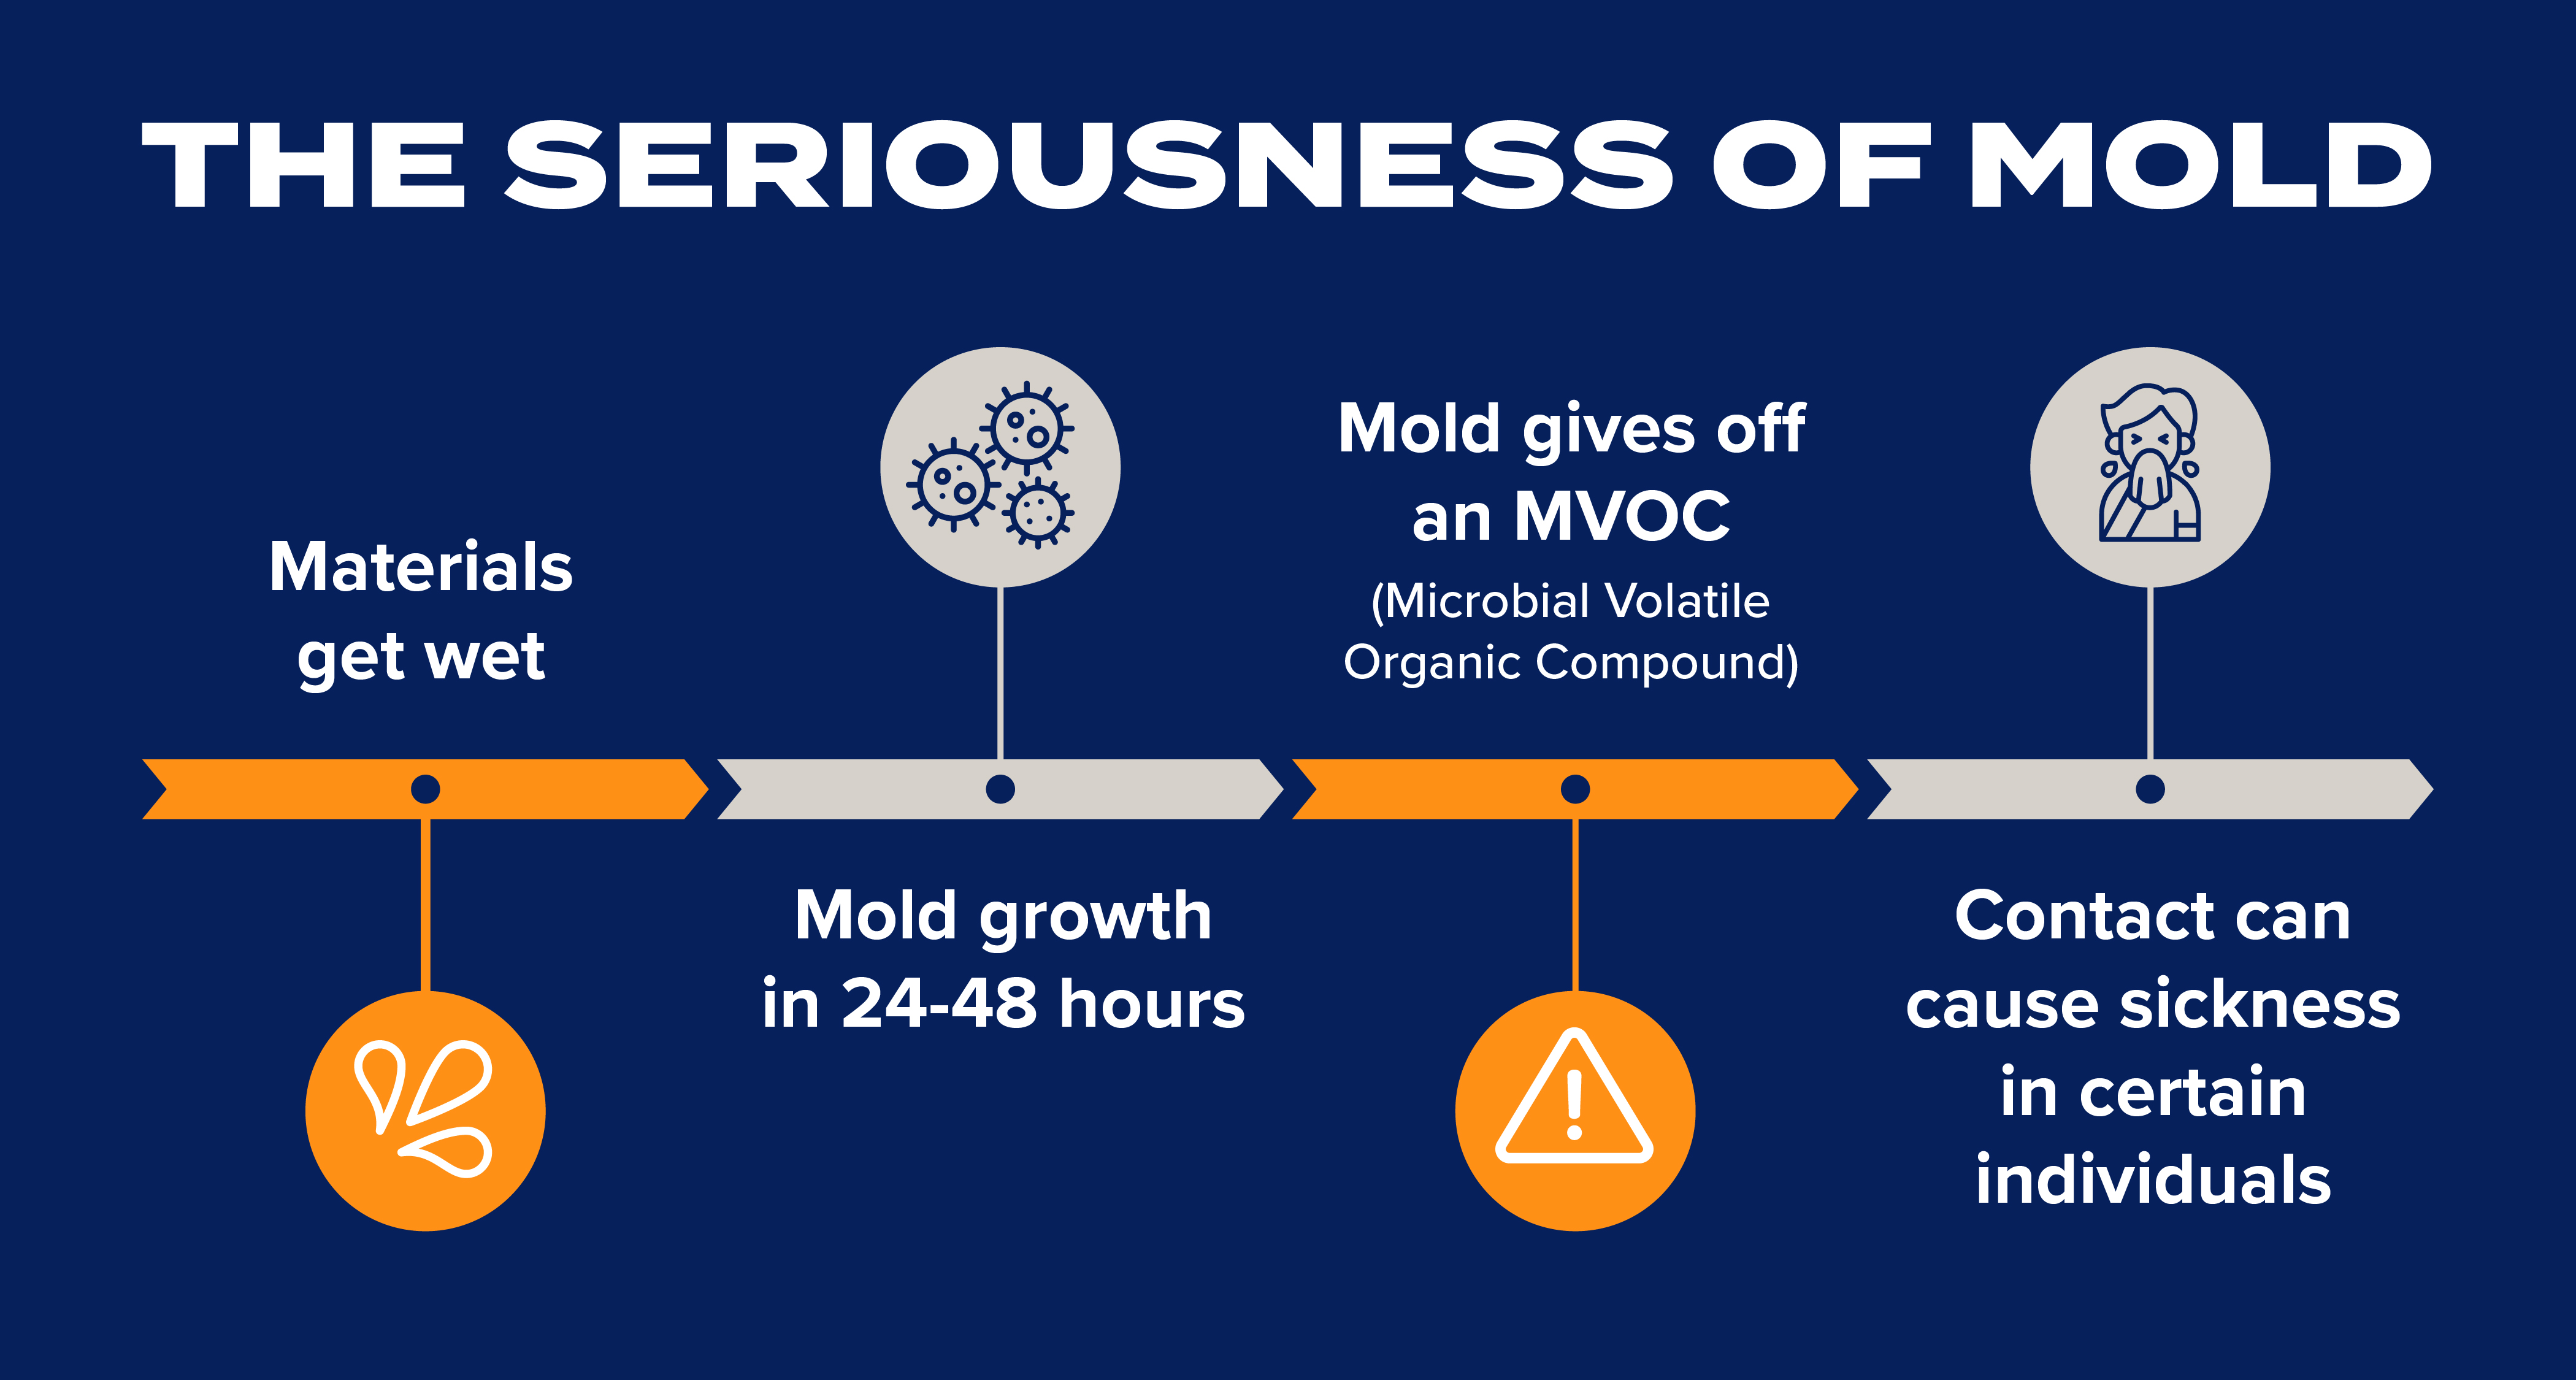 The Seriousness of Mold graphic